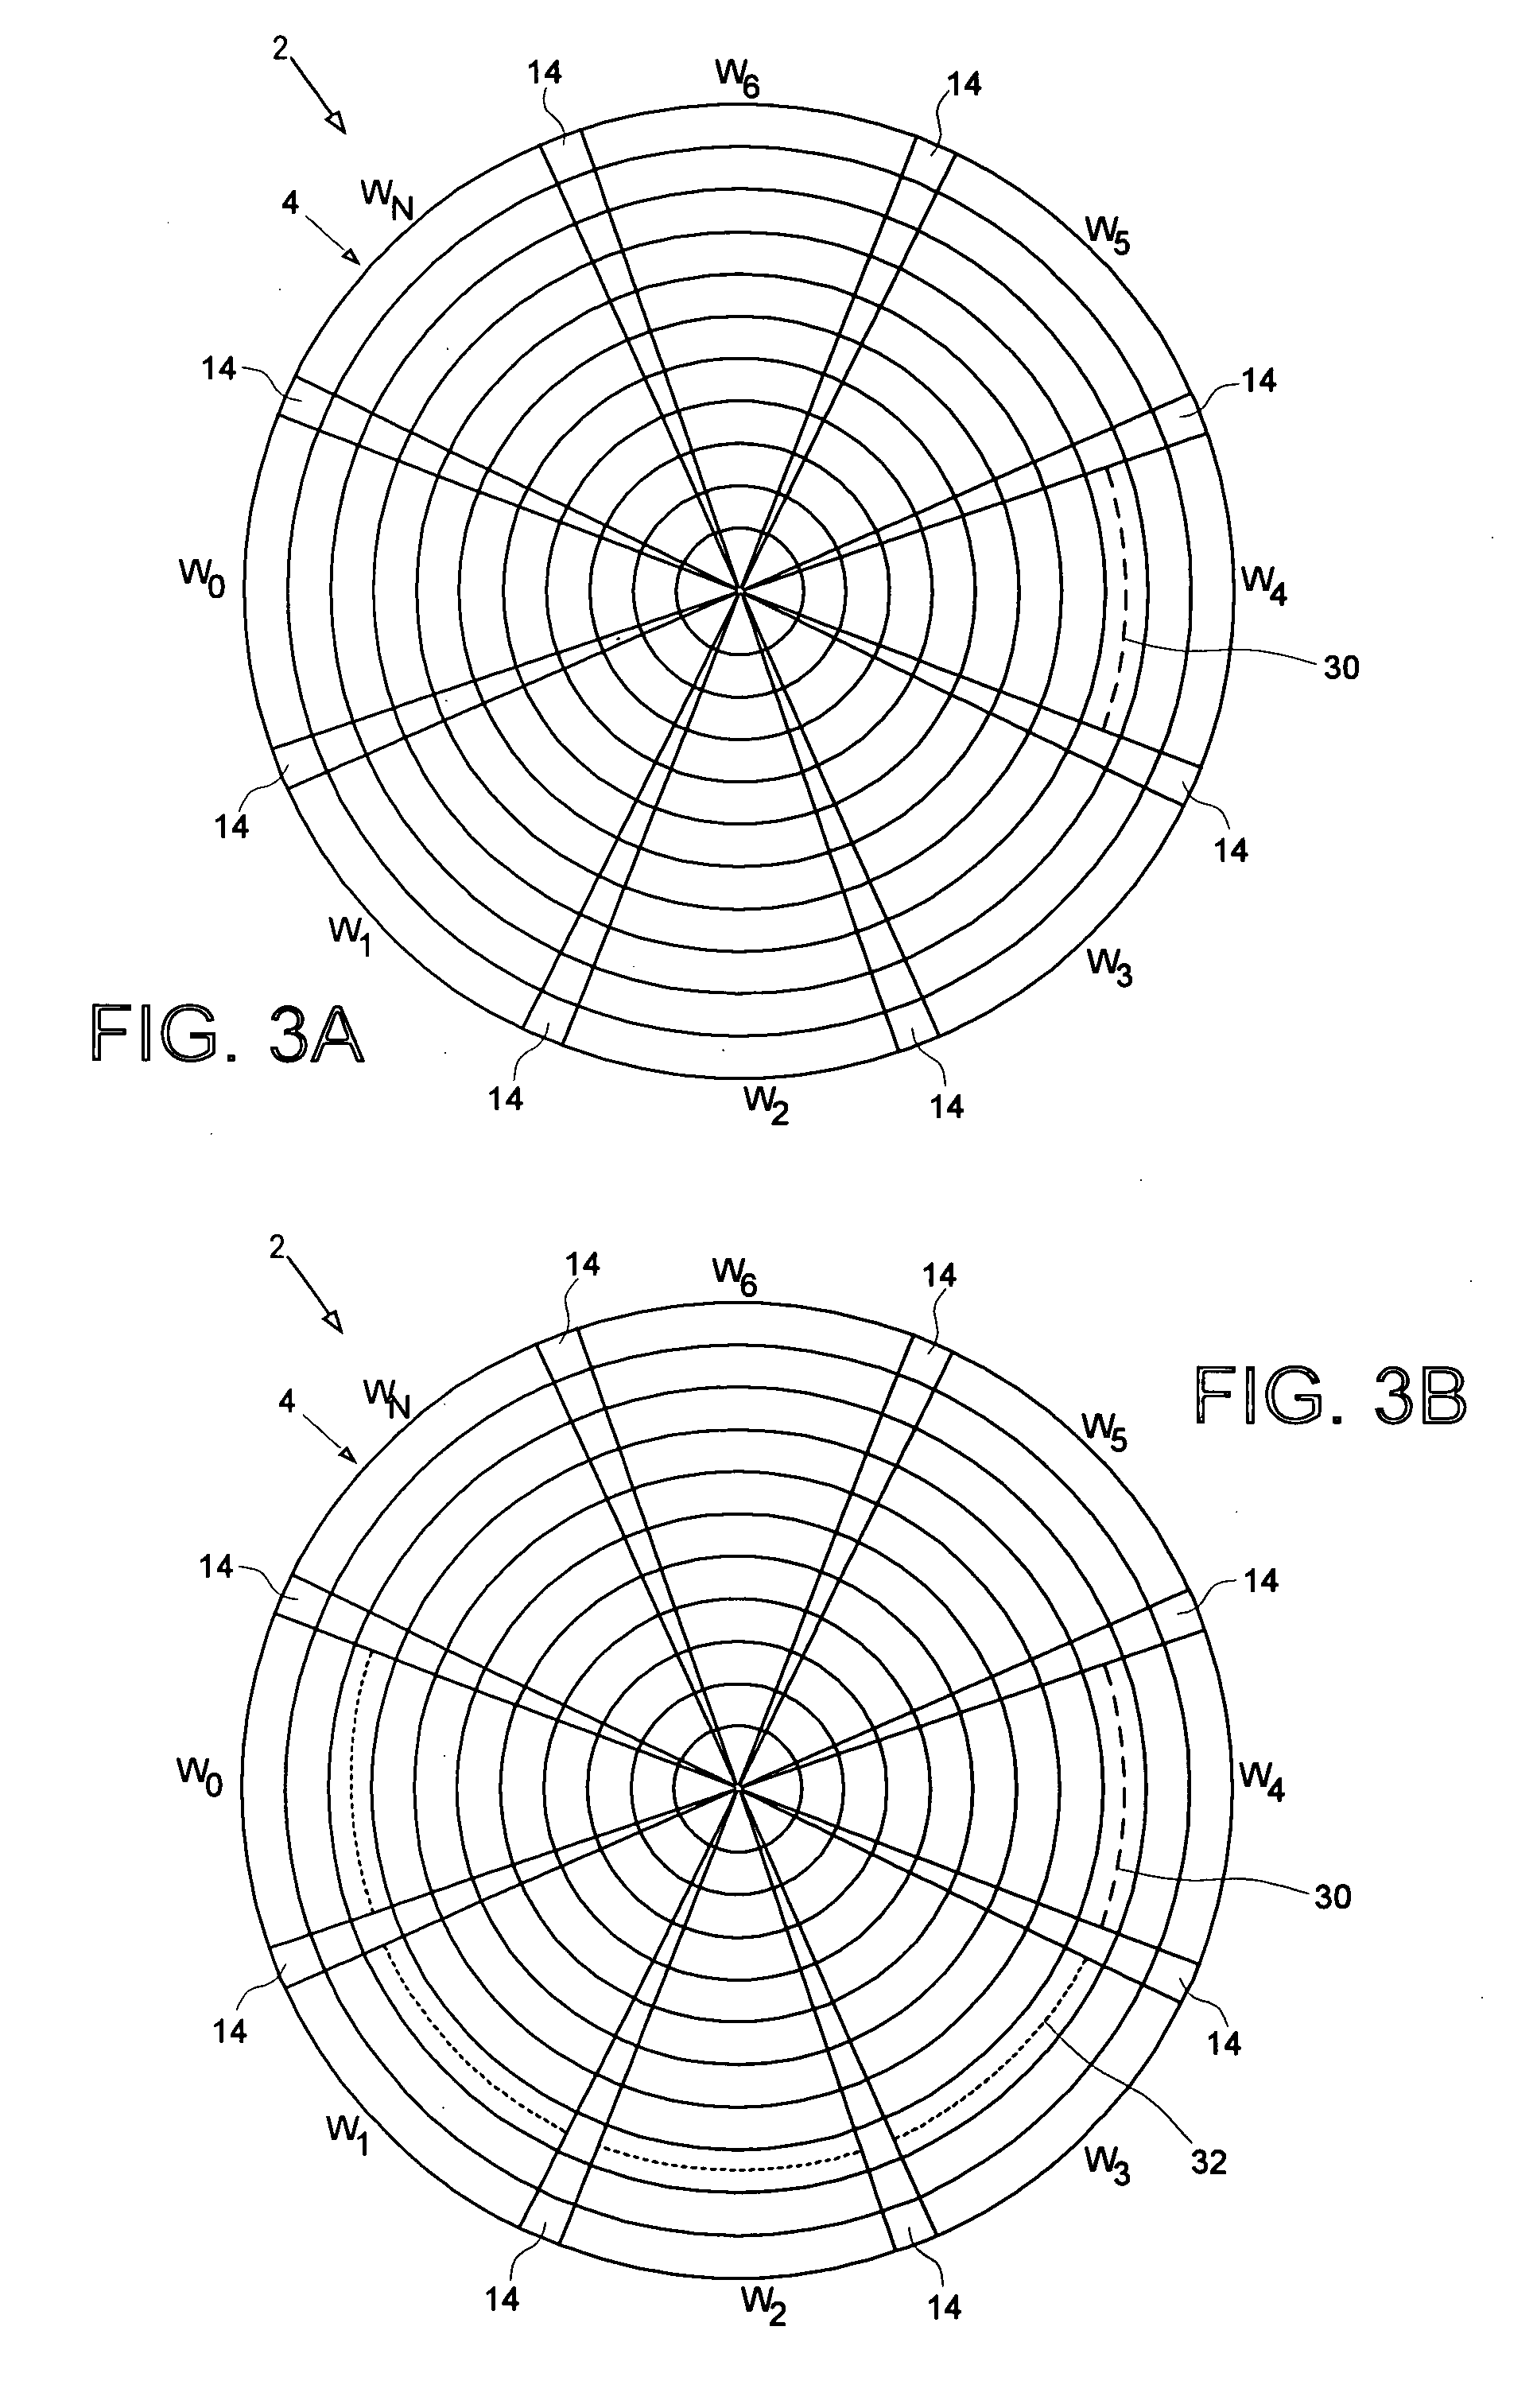 Disk drive measuring pole tip protrusion by performing a write operation to heat the transducer